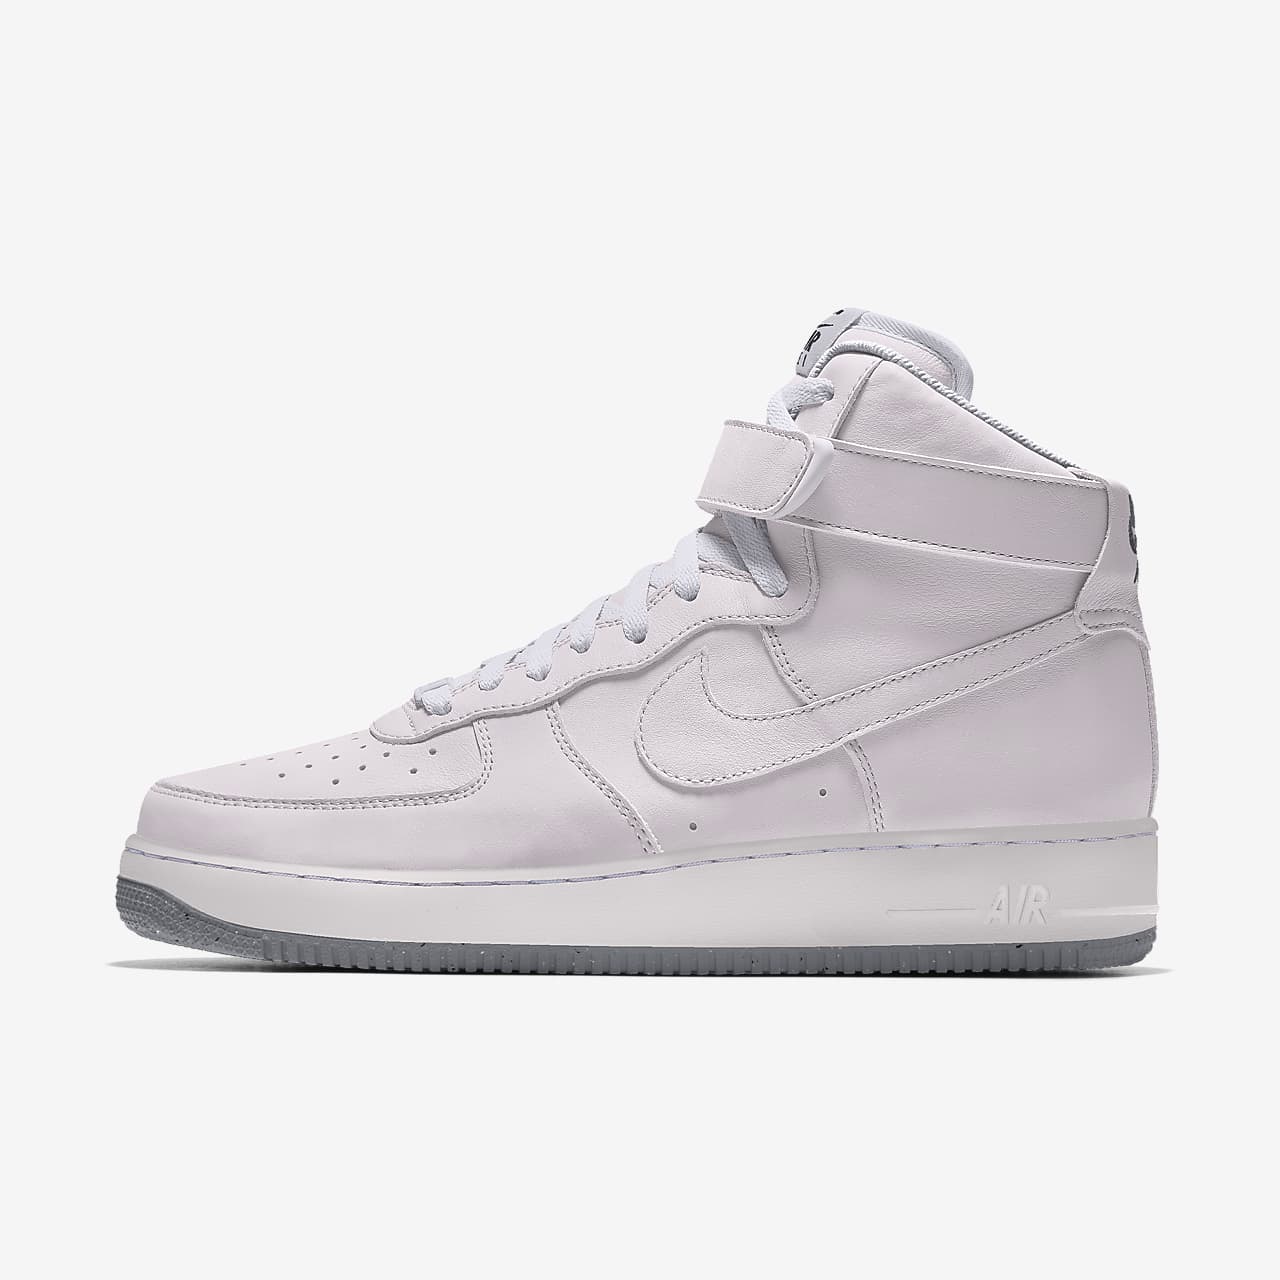 Nike Air Force 1 高筒 By You 專屬訂製女鞋